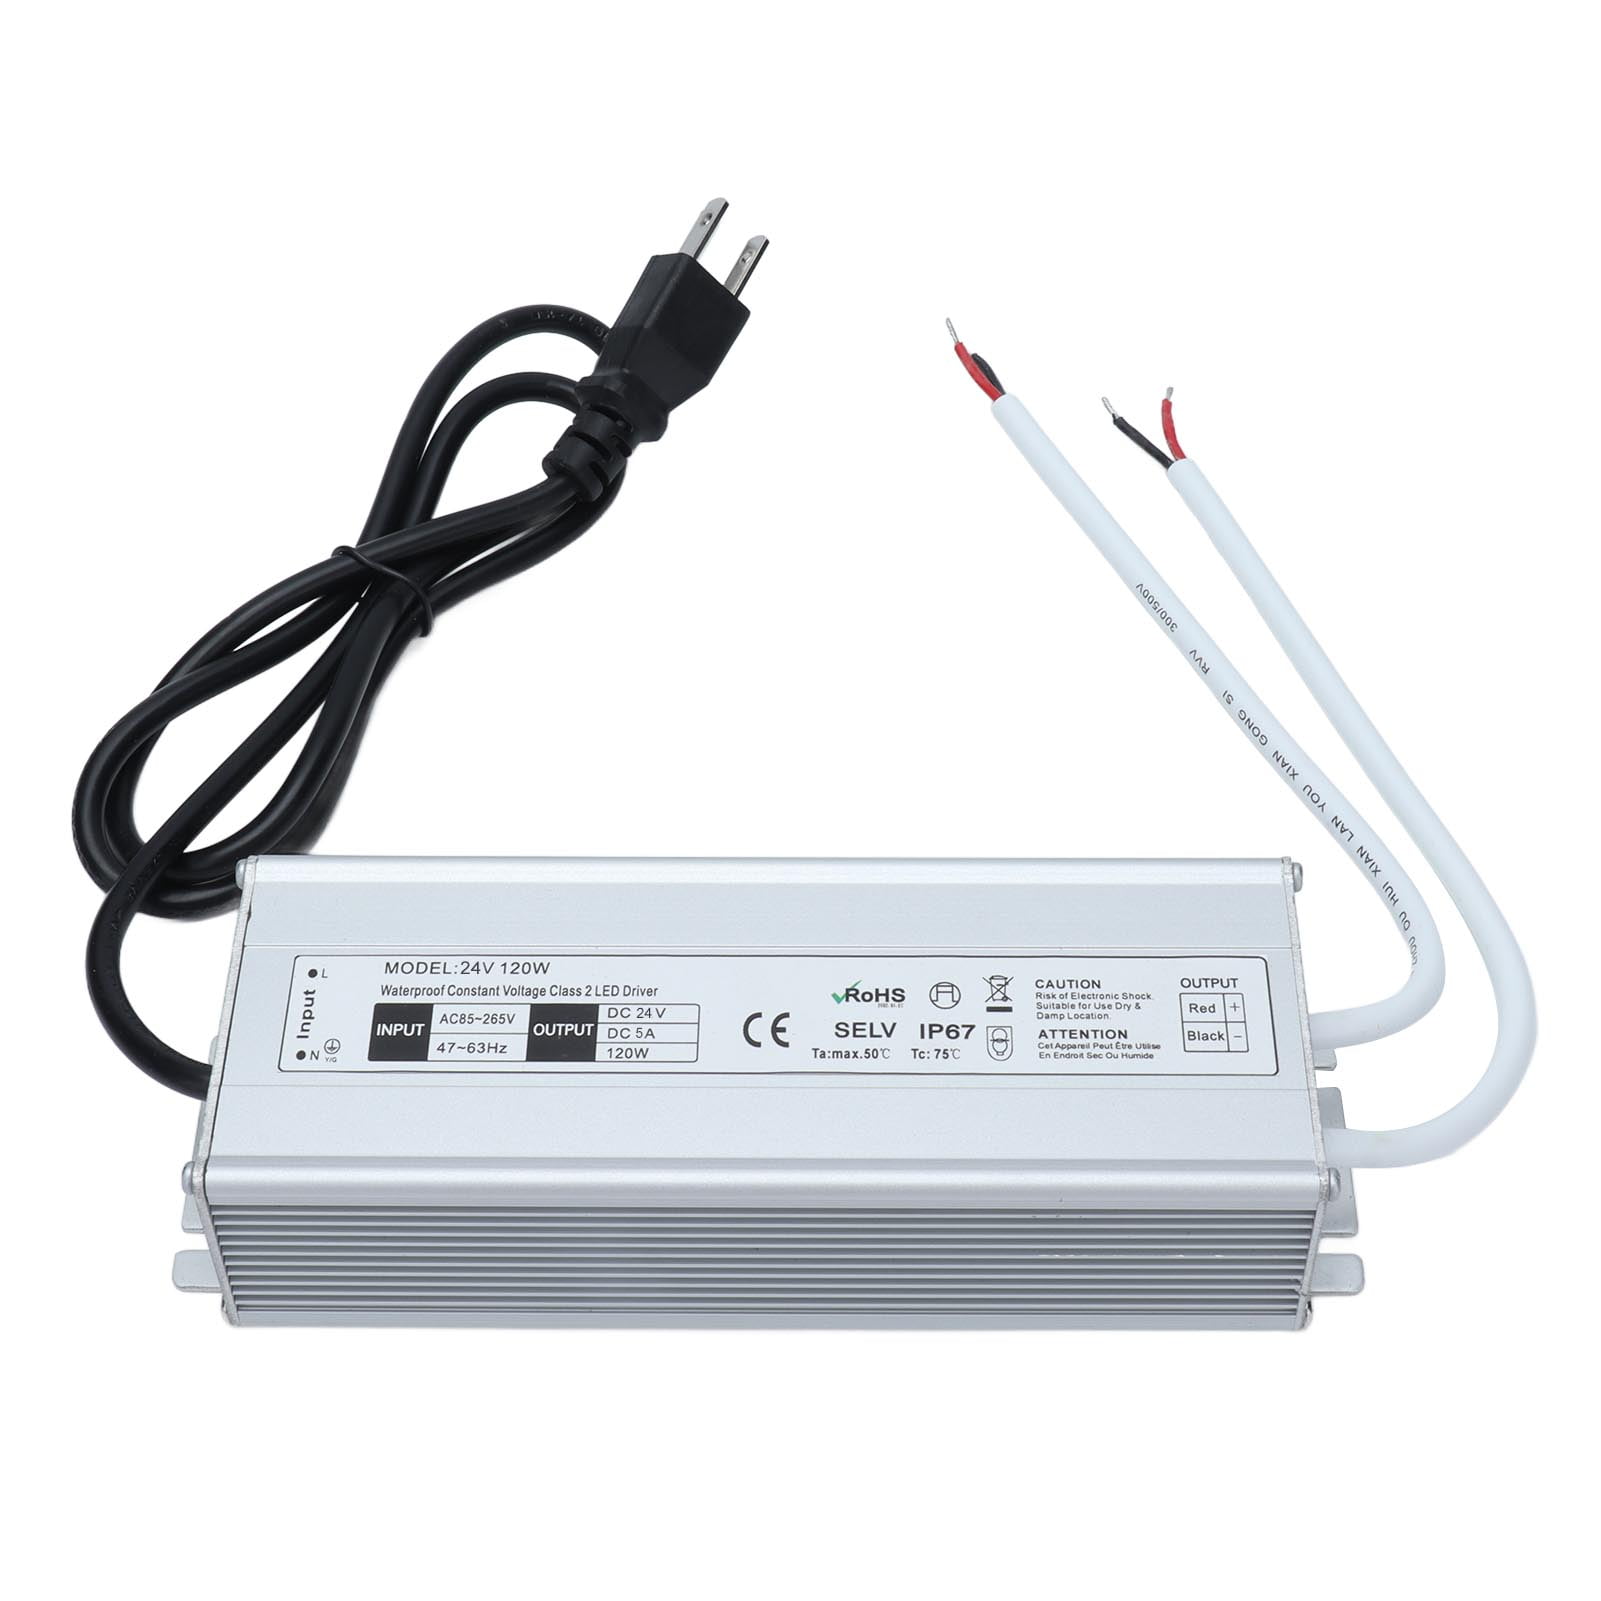 eskalere mammal form LED Power Supply, IP67 Waterproof 120W LED Driver For Computer Project For  Lights For Outdoor Use US Plug 24V 0-5A Output - Walmart.com